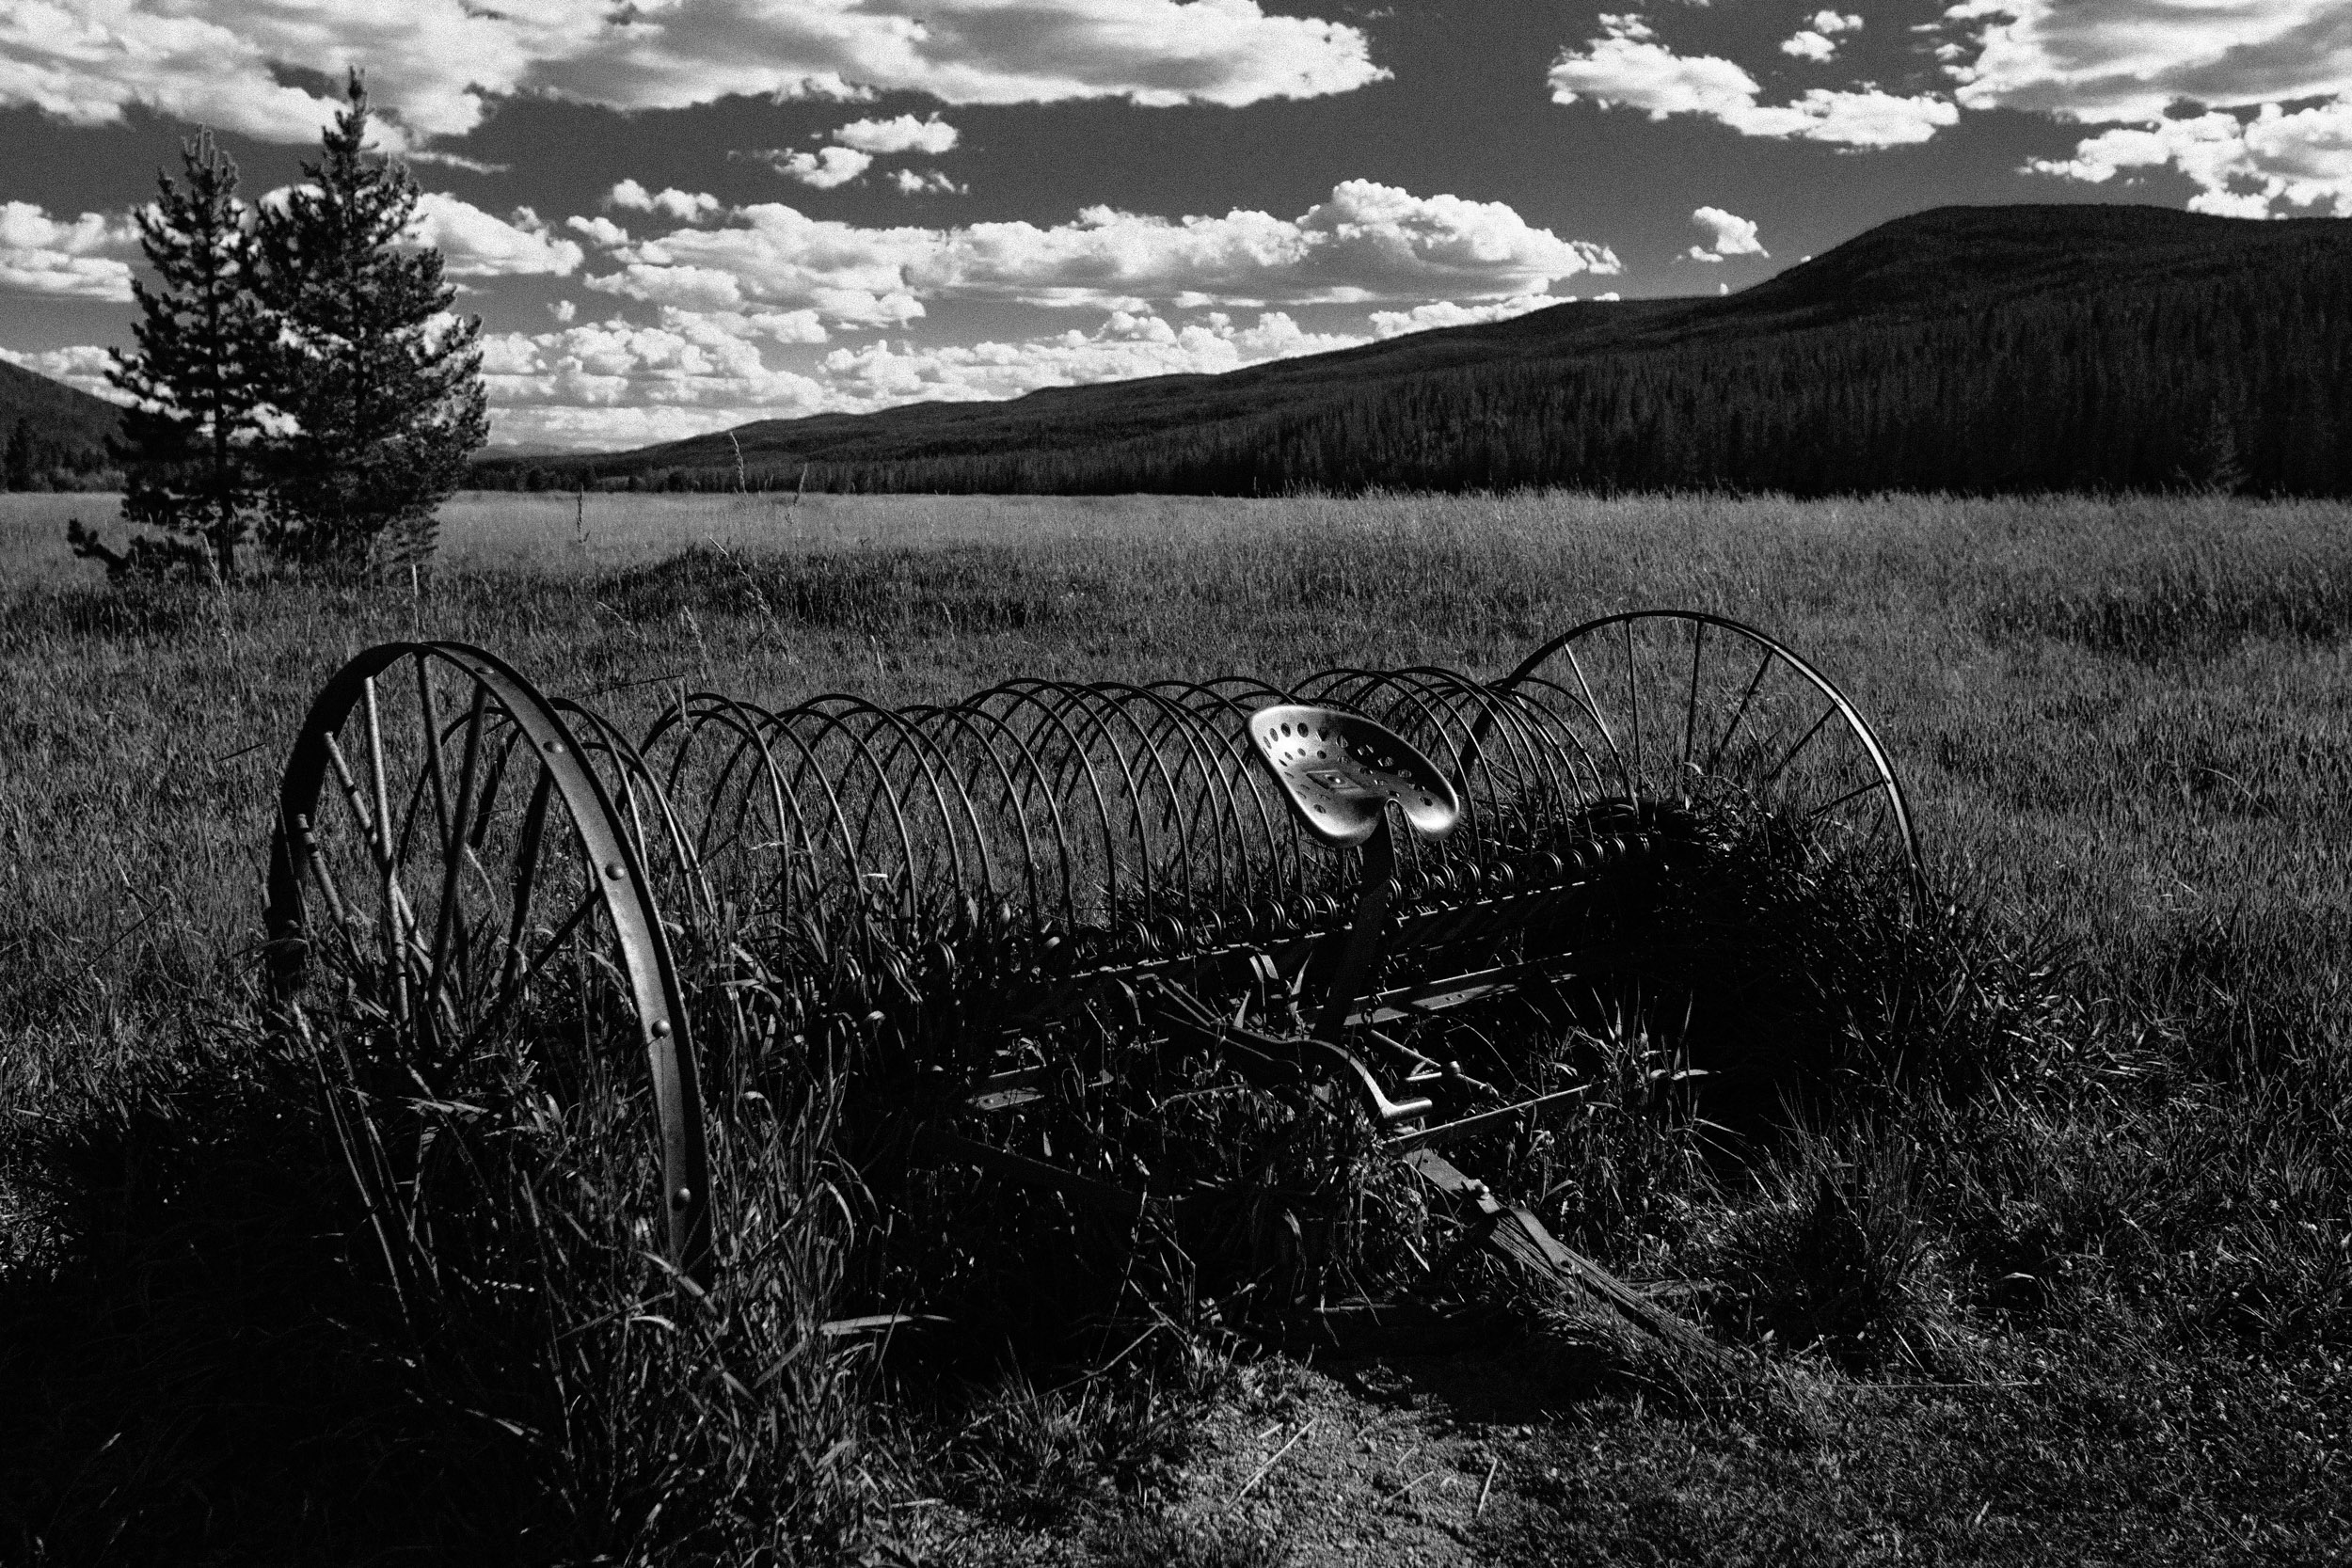 Abandoned farm equipment in a Rocky Mountain valley